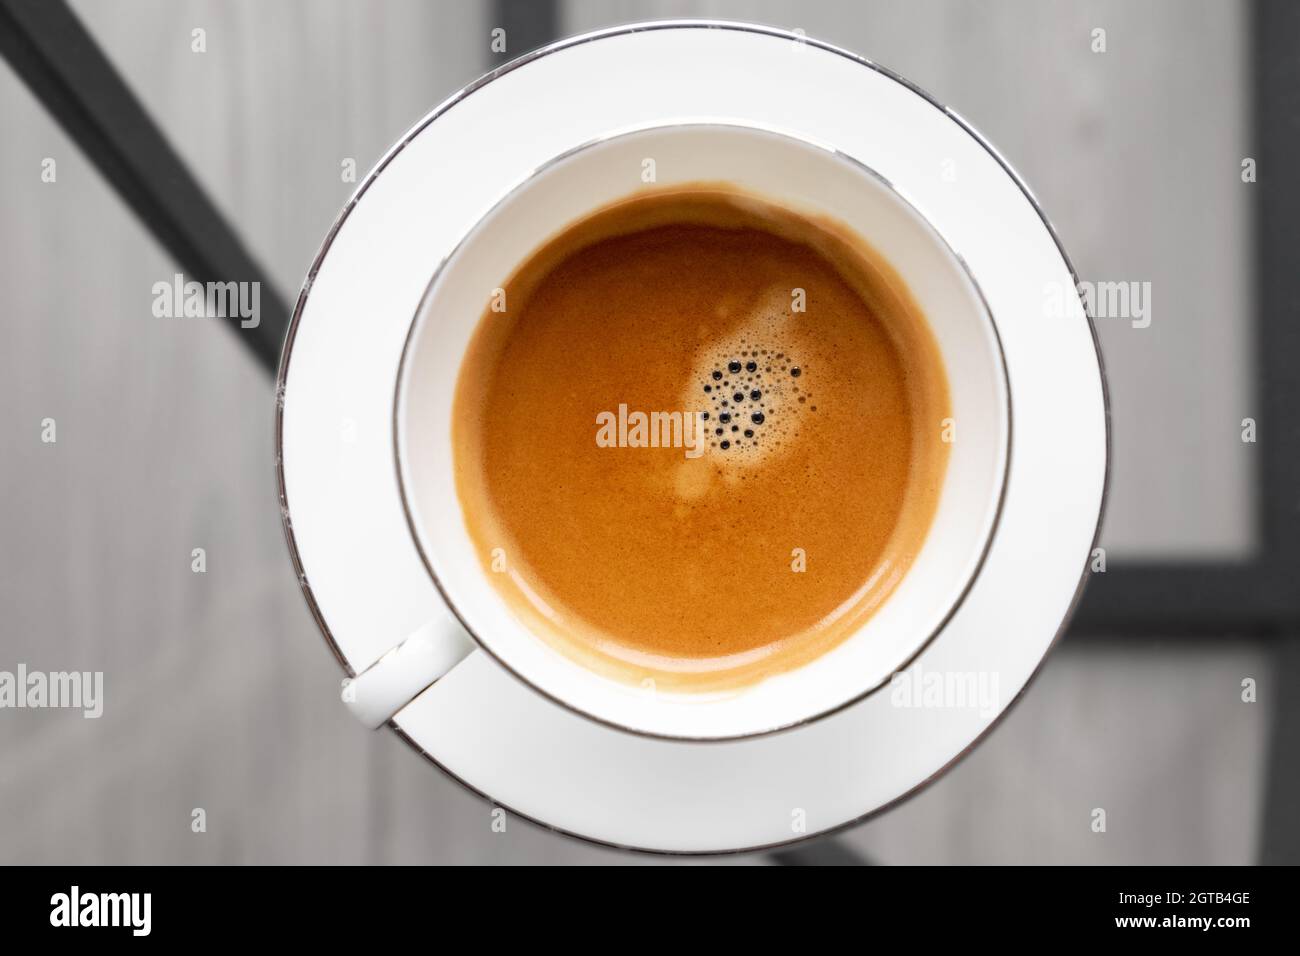 https://c8.alamy.com/comp/2GTB4GE/espresso-coffee-in-a-white-cup-stands-on-saucer-top-view-closeup-photo-with-selective-focus-2GTB4GE.jpg